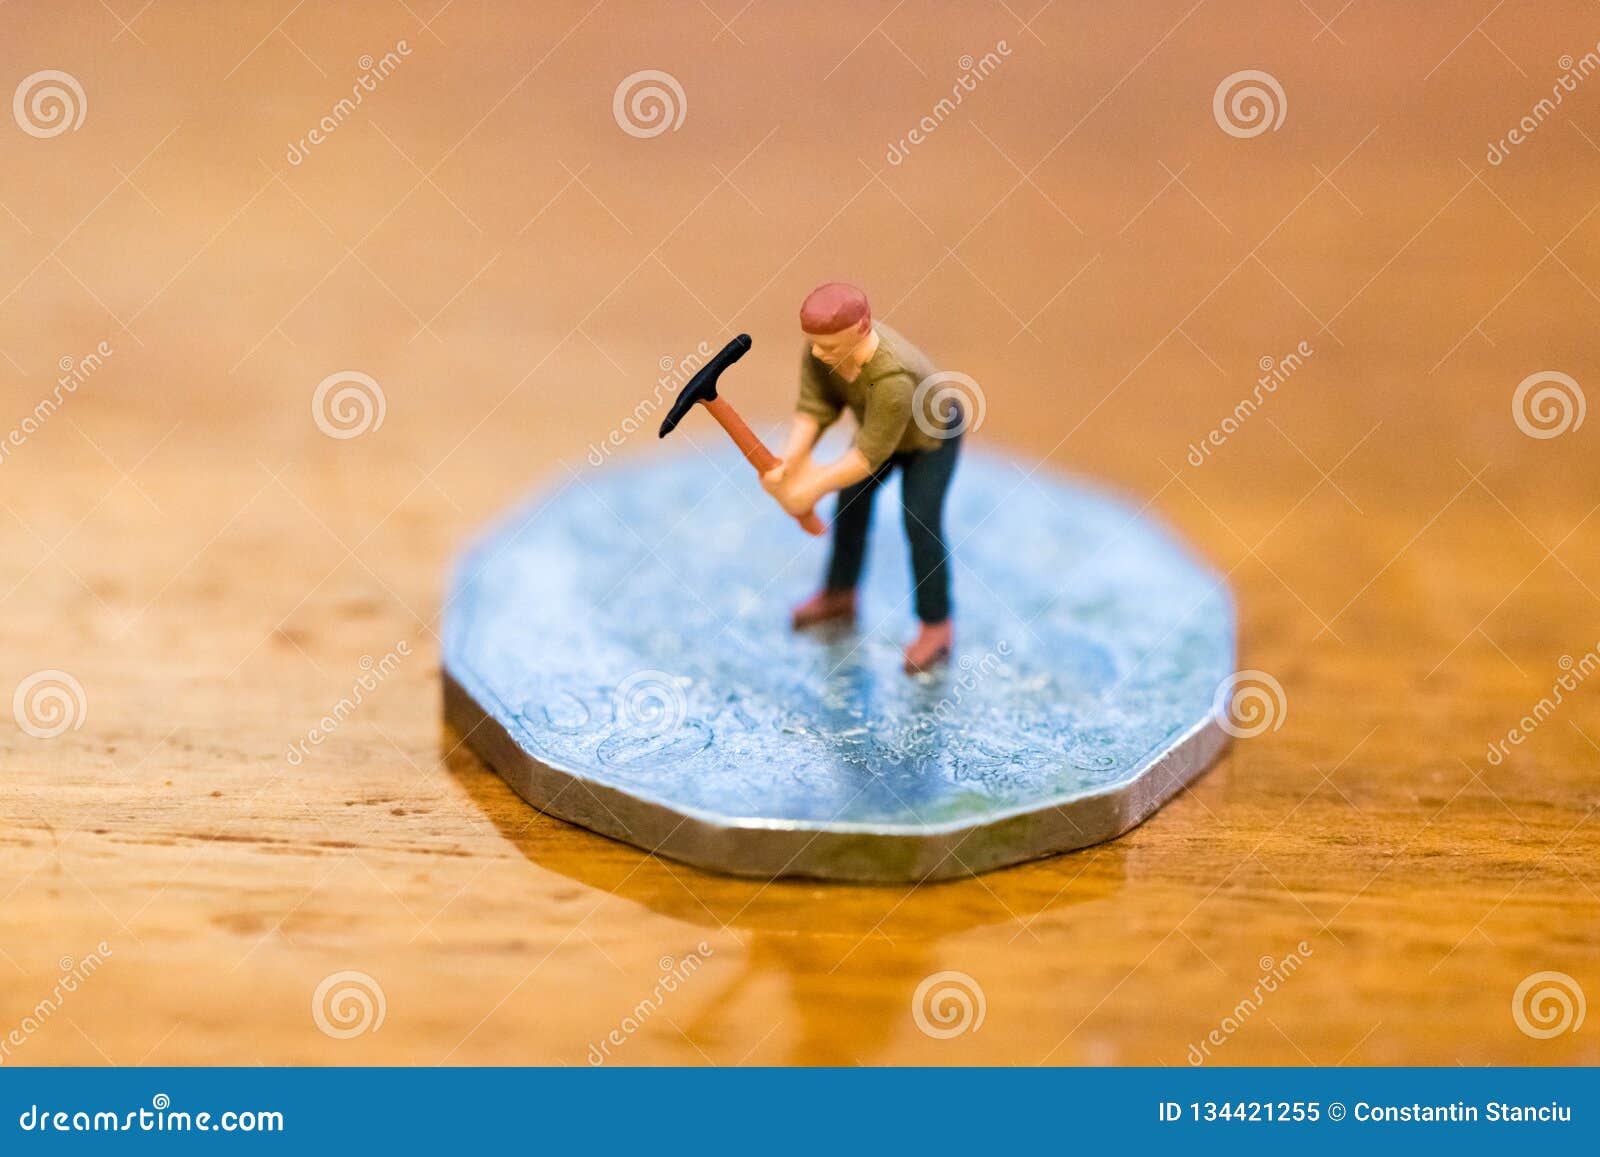 Miniature Figure As Miner Digging Coin Stock Image - Image ...